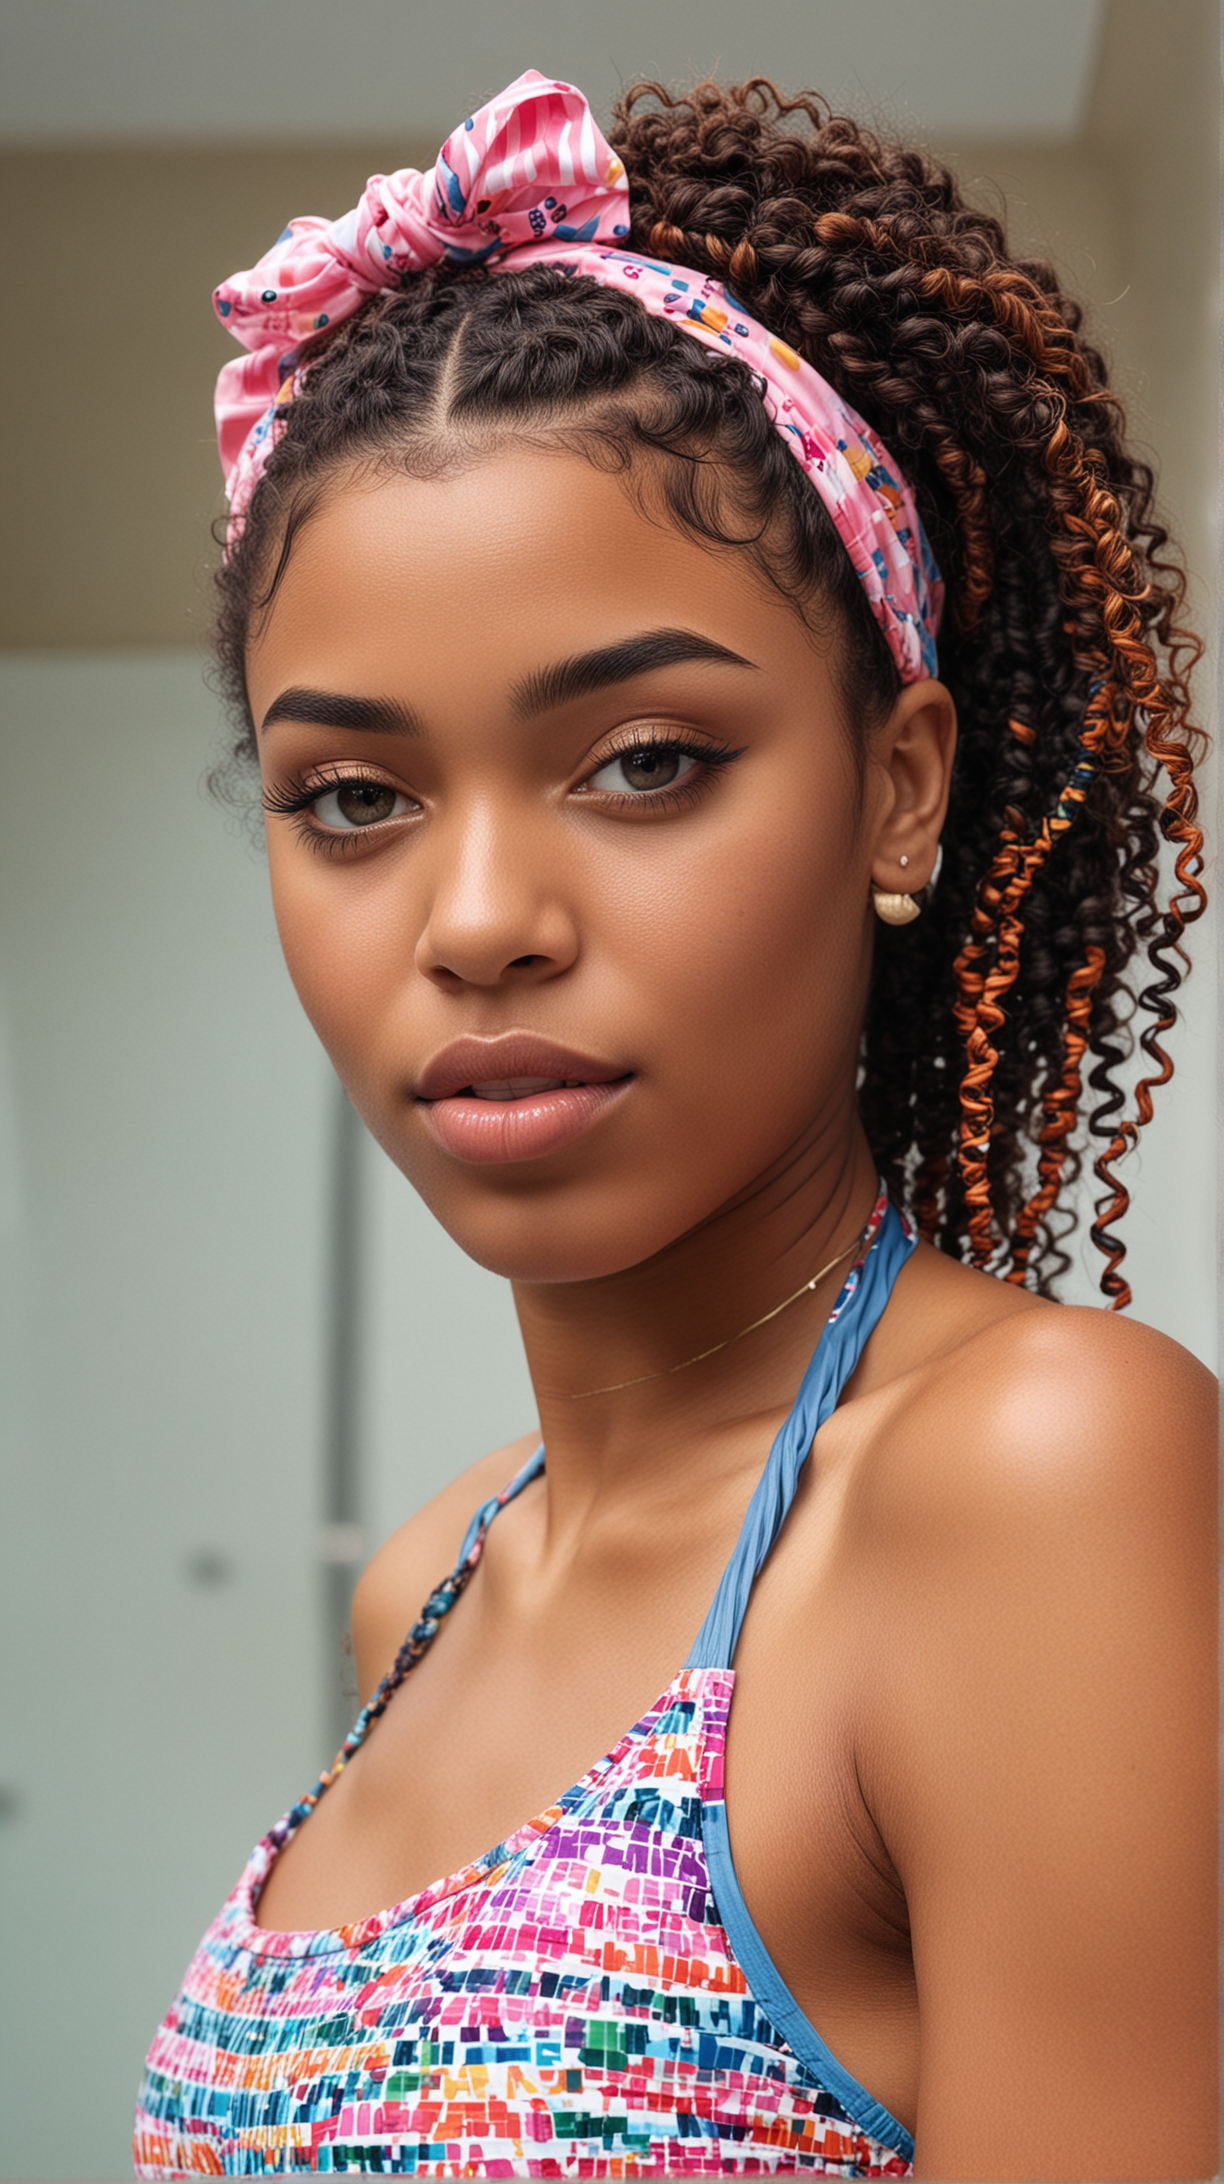 22 Stylish Swim Hairstyles for All Hair Types: Short, Curly & Natural Hair